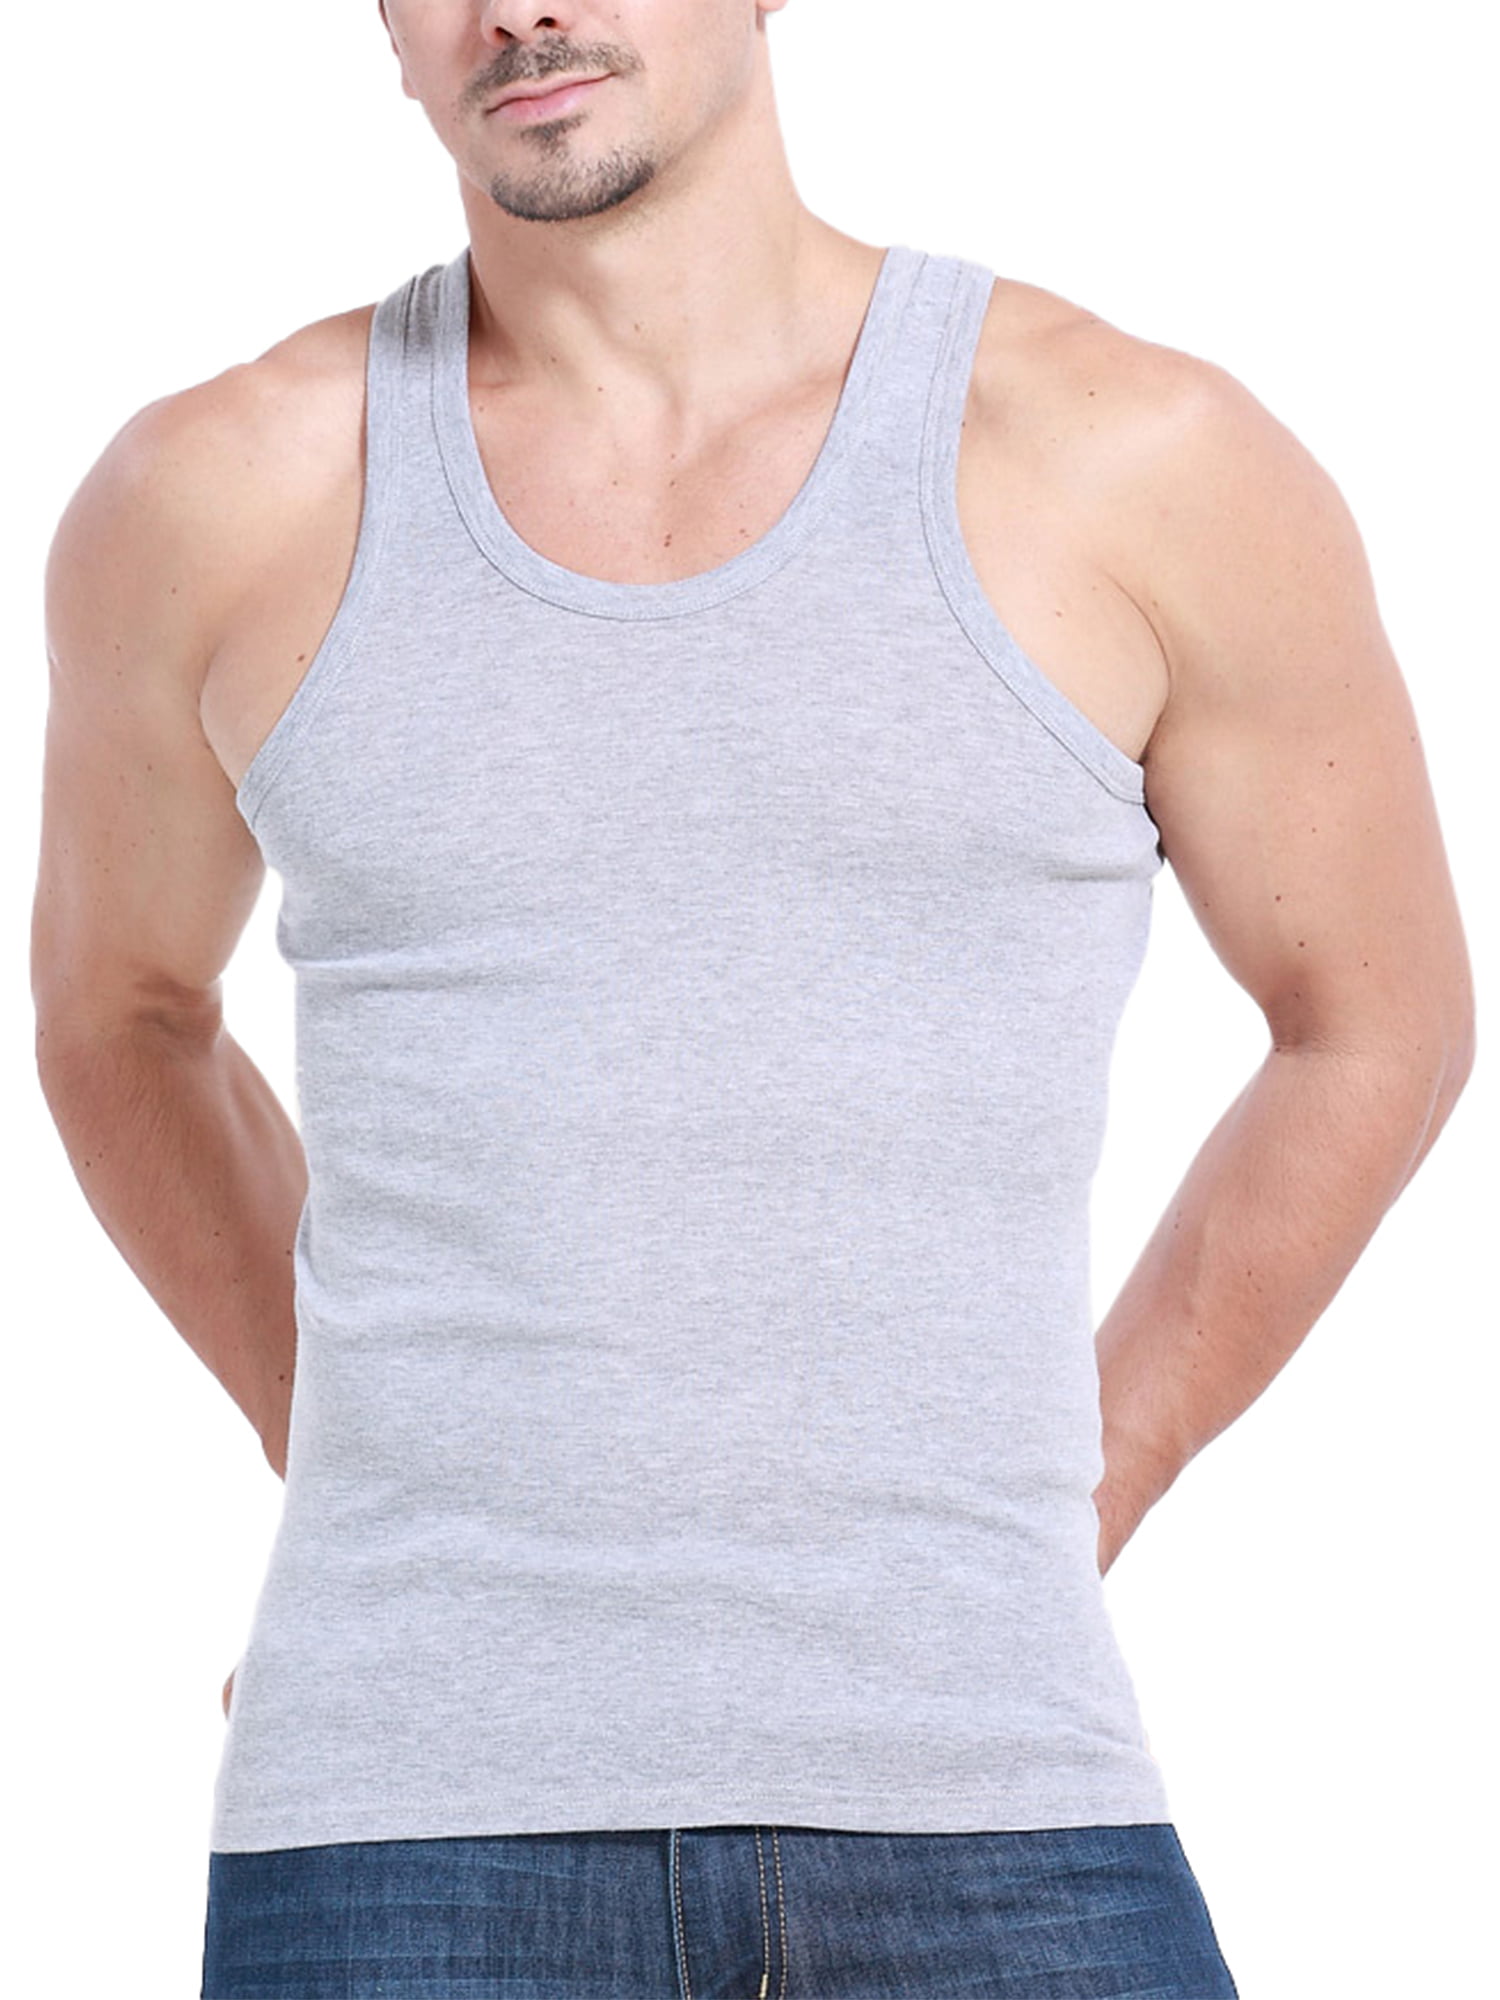 AS Know AS Mens Tank Top Casual Sleeveless Cotton Shirt